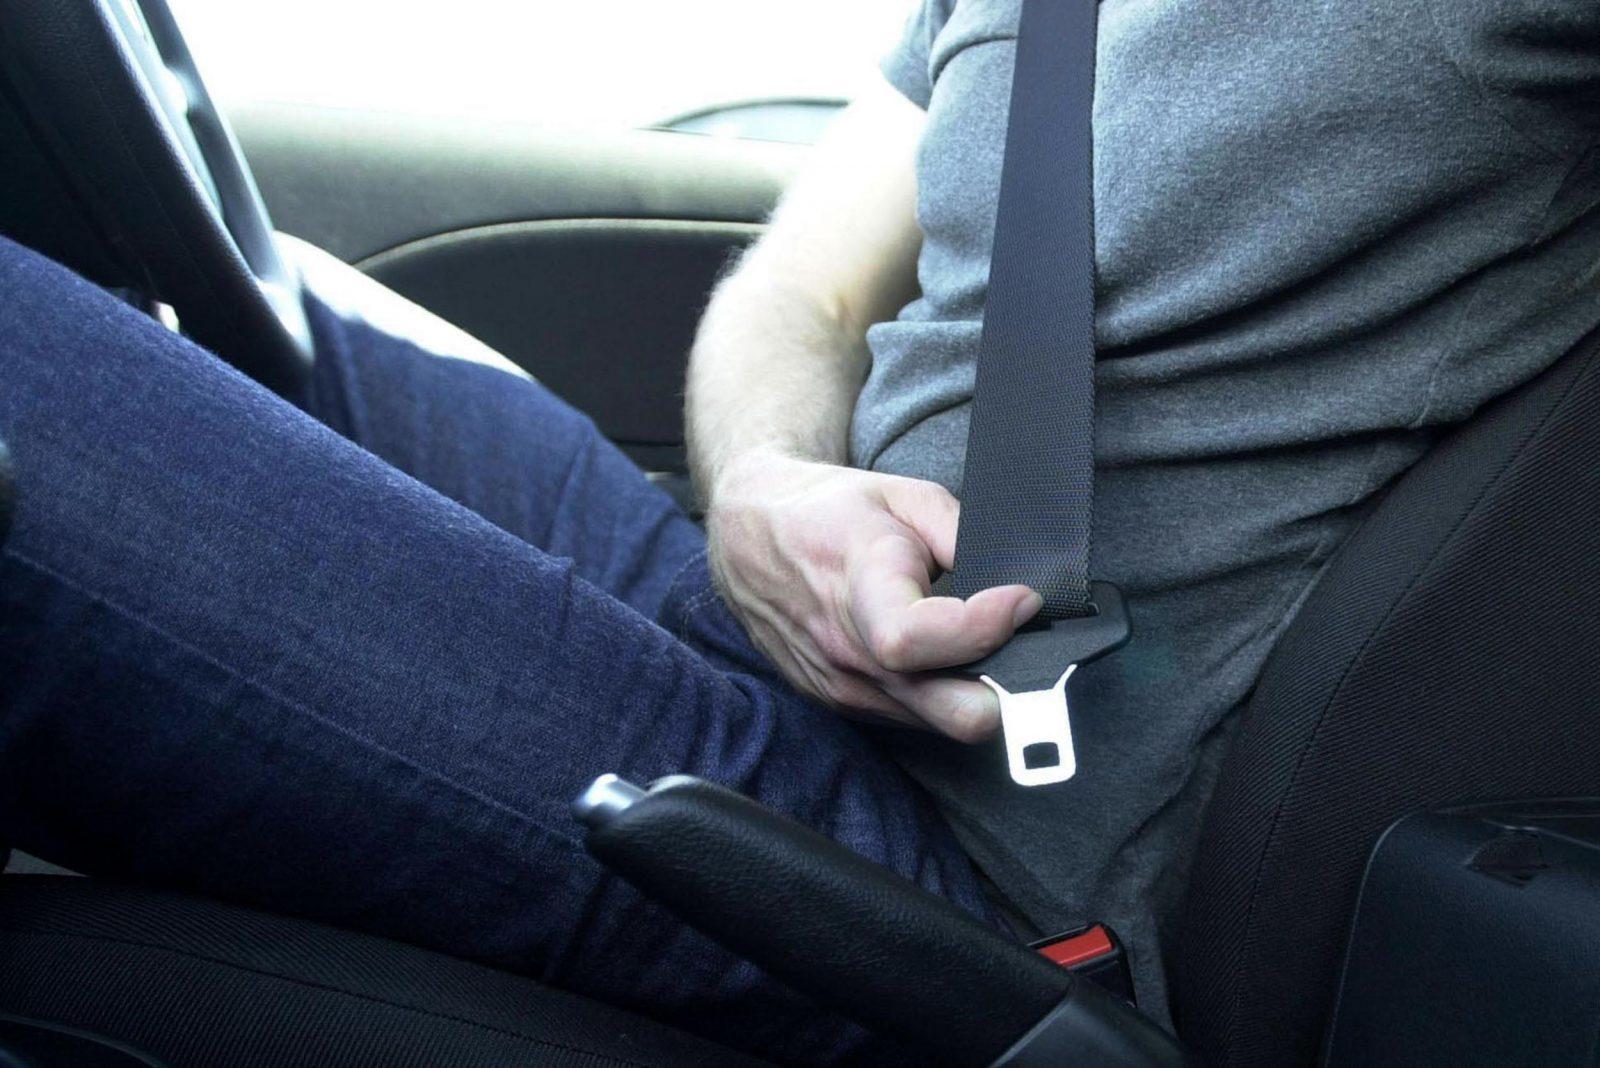 fastening your seatbelt in the car